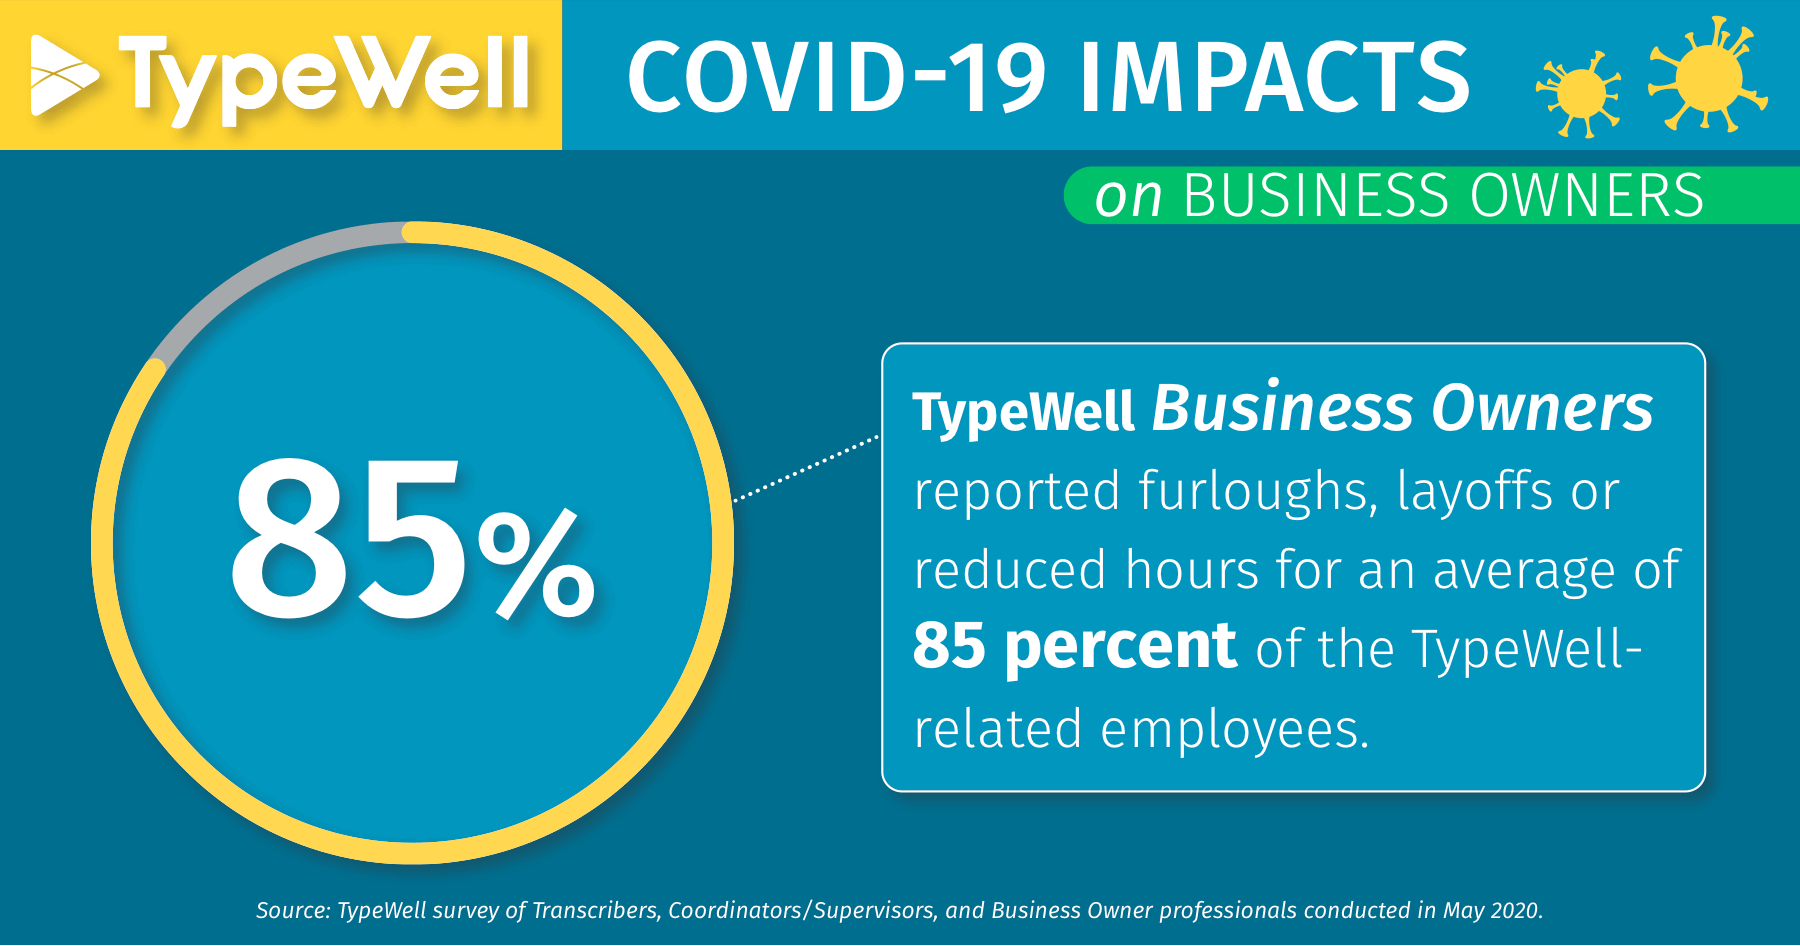 COVID-19 impacts on business owners: reported furloughs, layoffs or reduced hours for an average of 85% of the TypeWell-related employees.